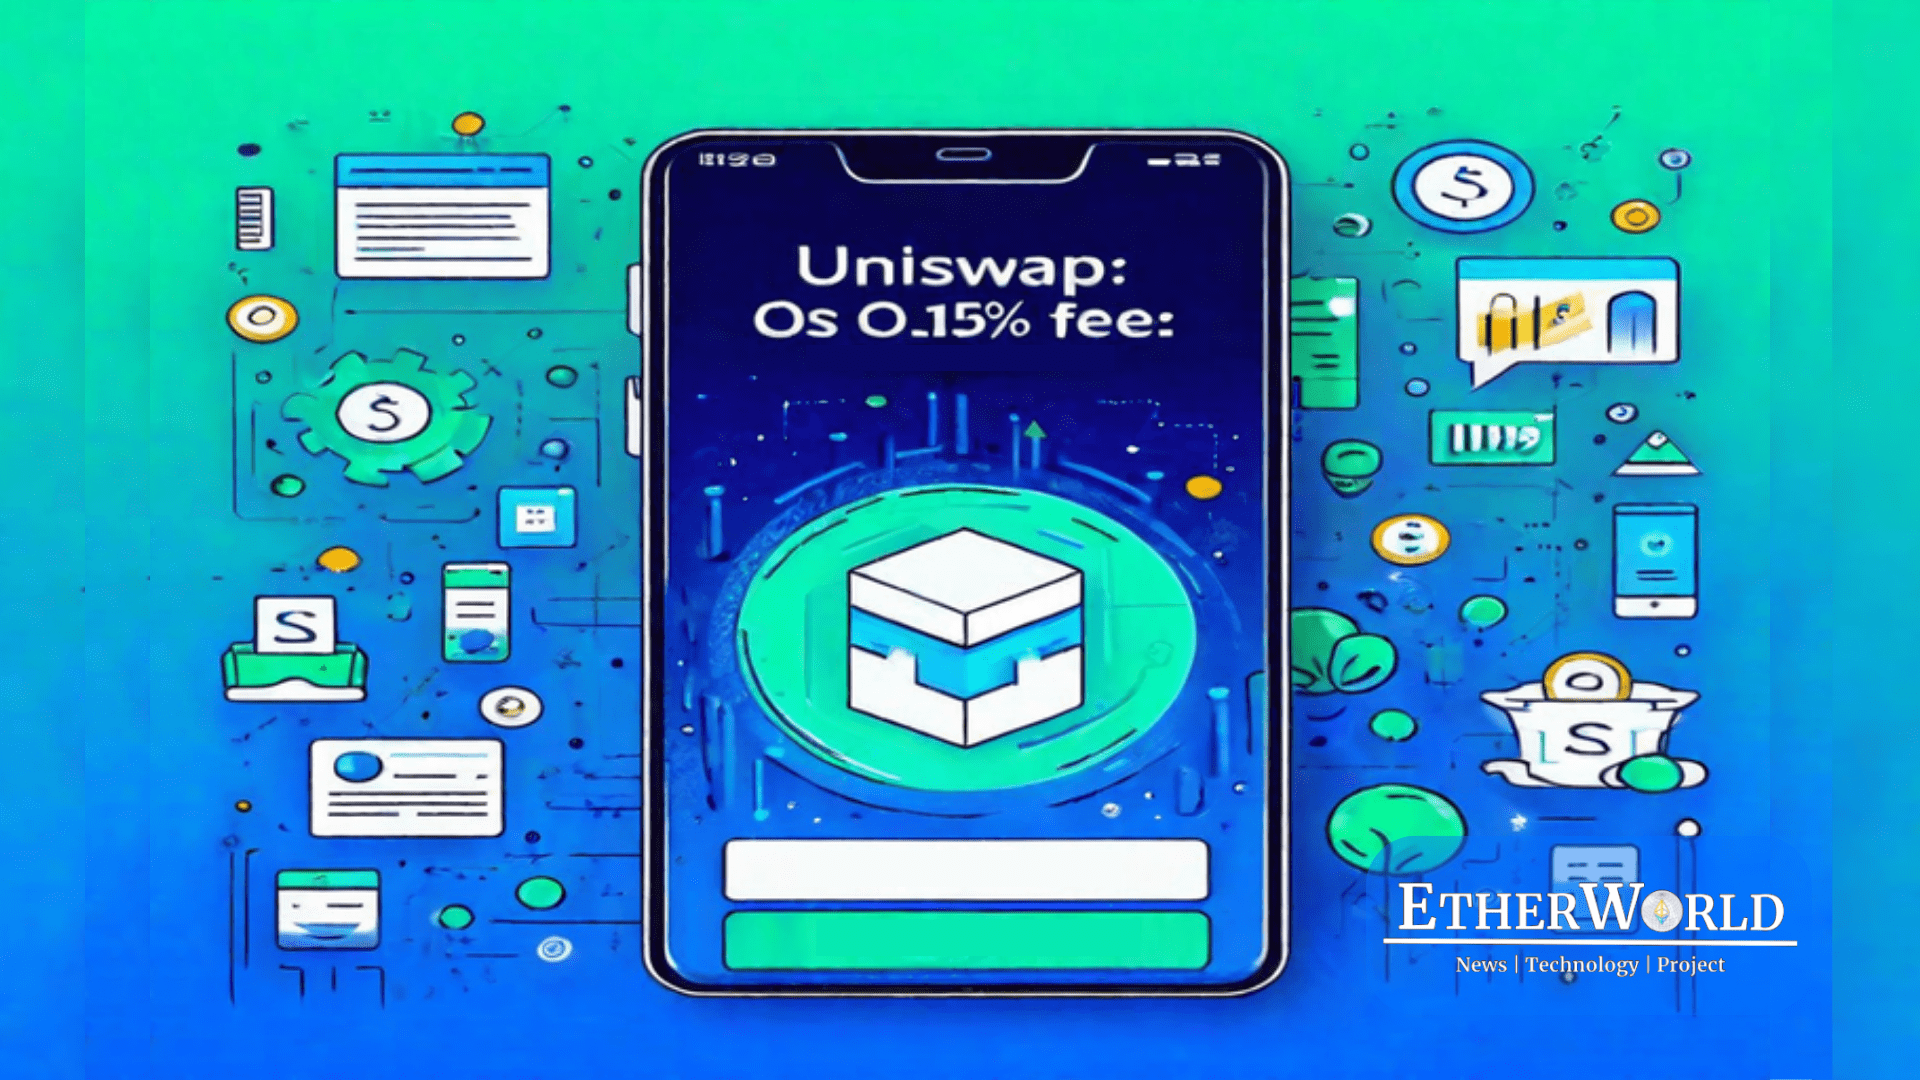 Uniswap Introduces 0.15% Swap Fee: A Controversial Move in the DeFi World